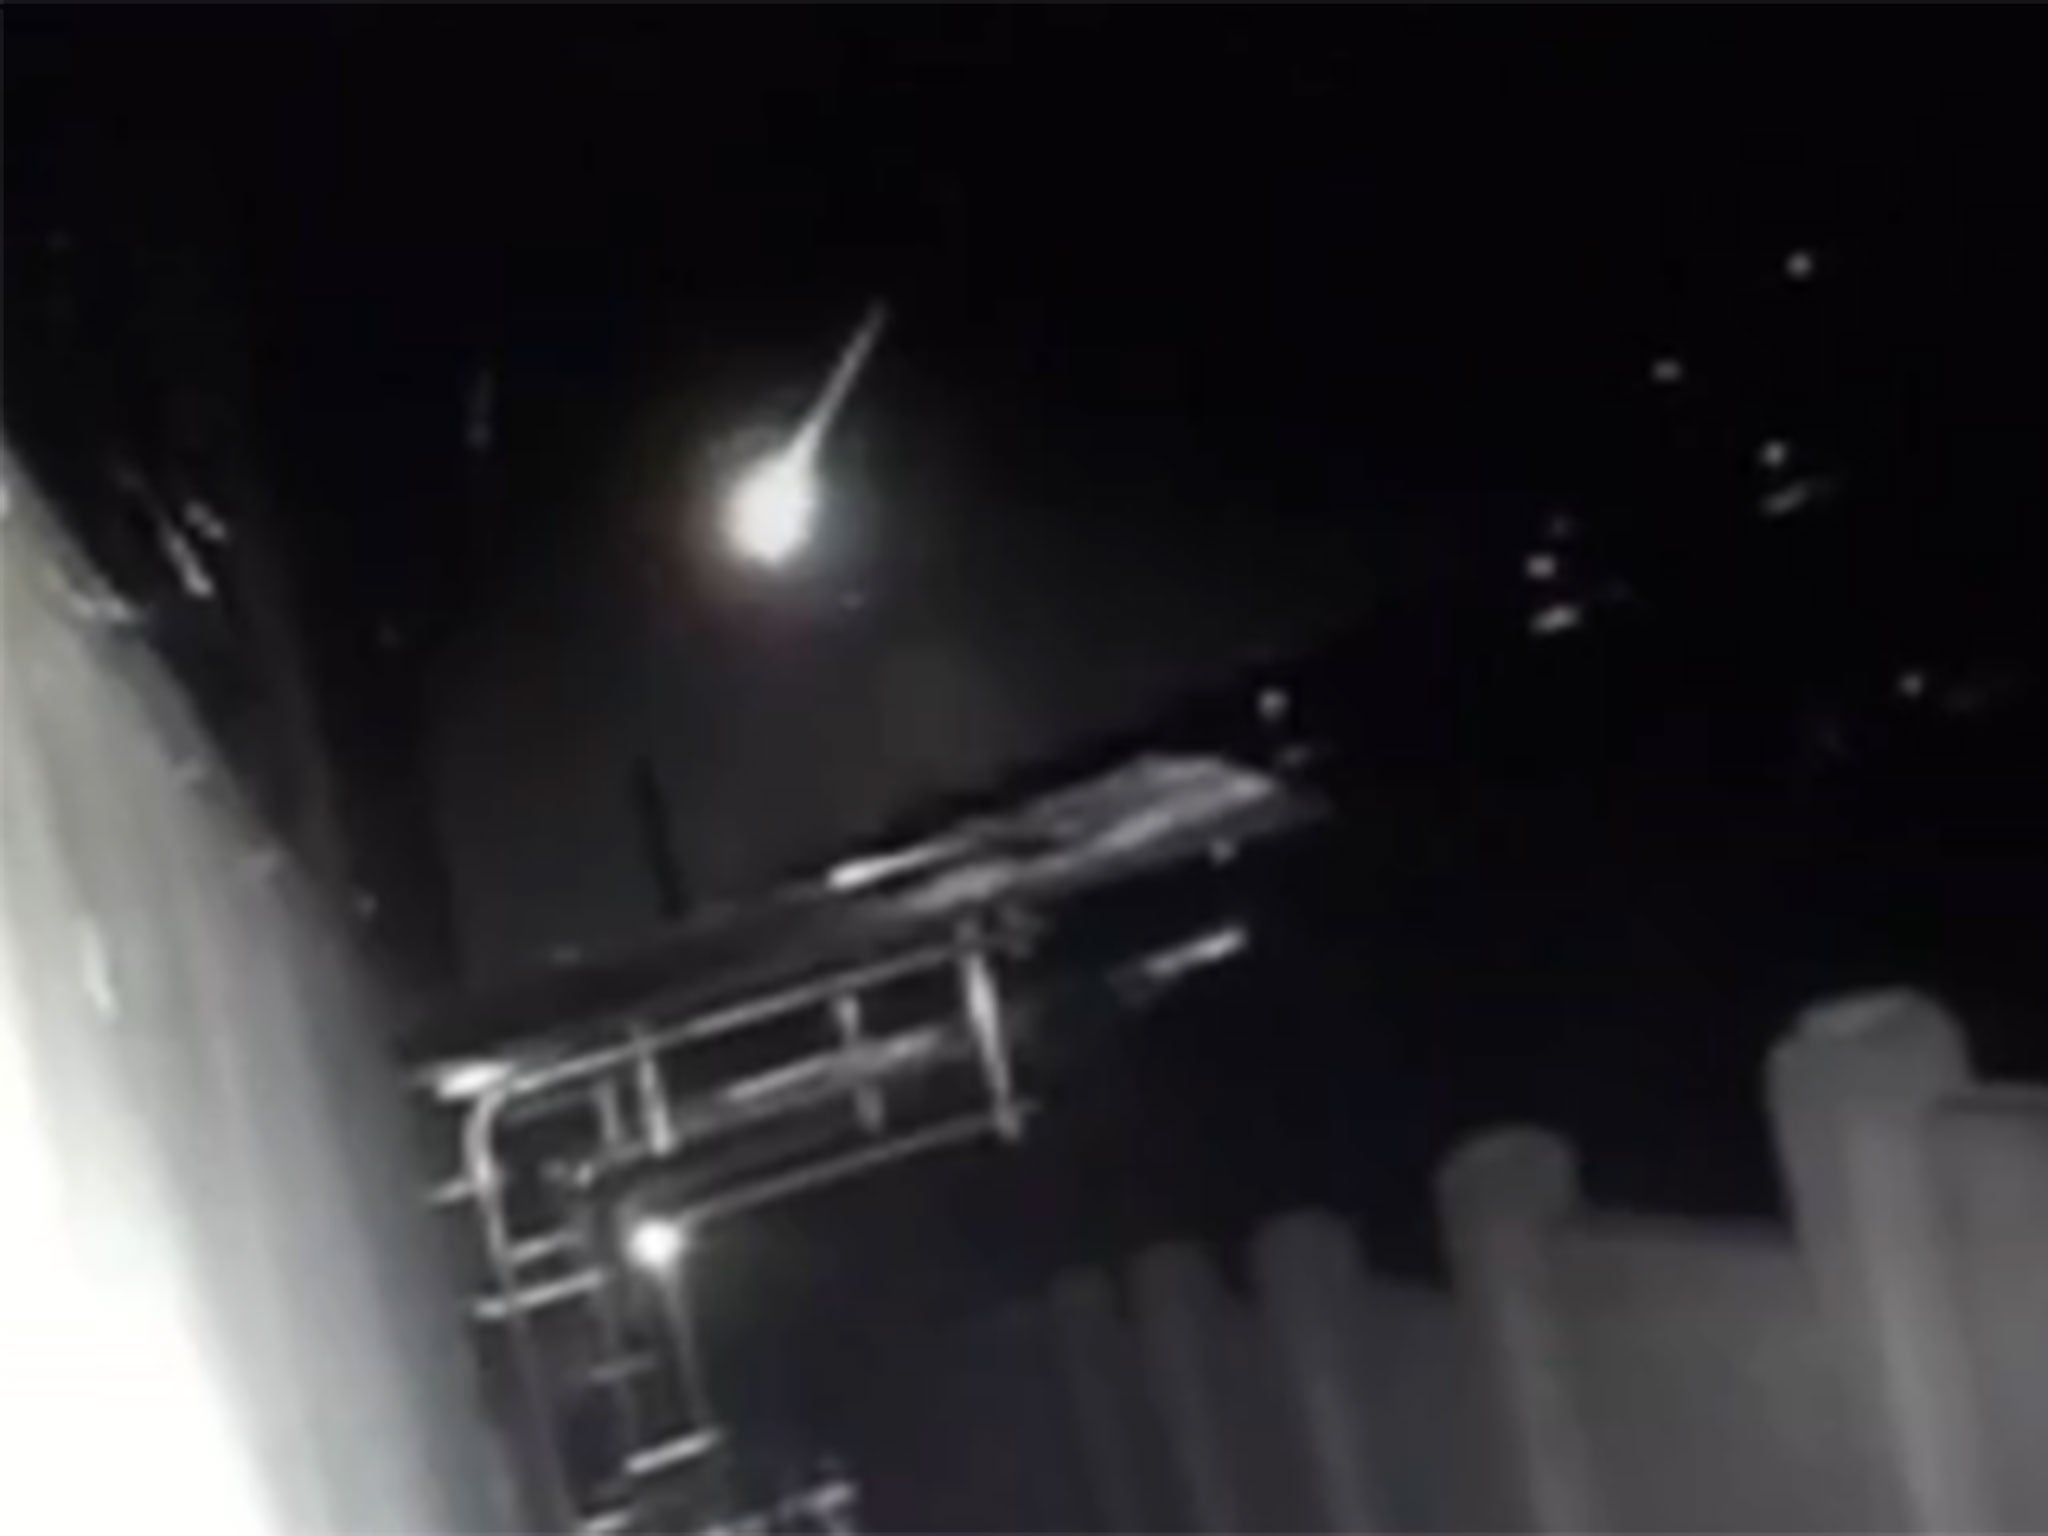 The meteorite broke up above the city of Dej in northern Romania